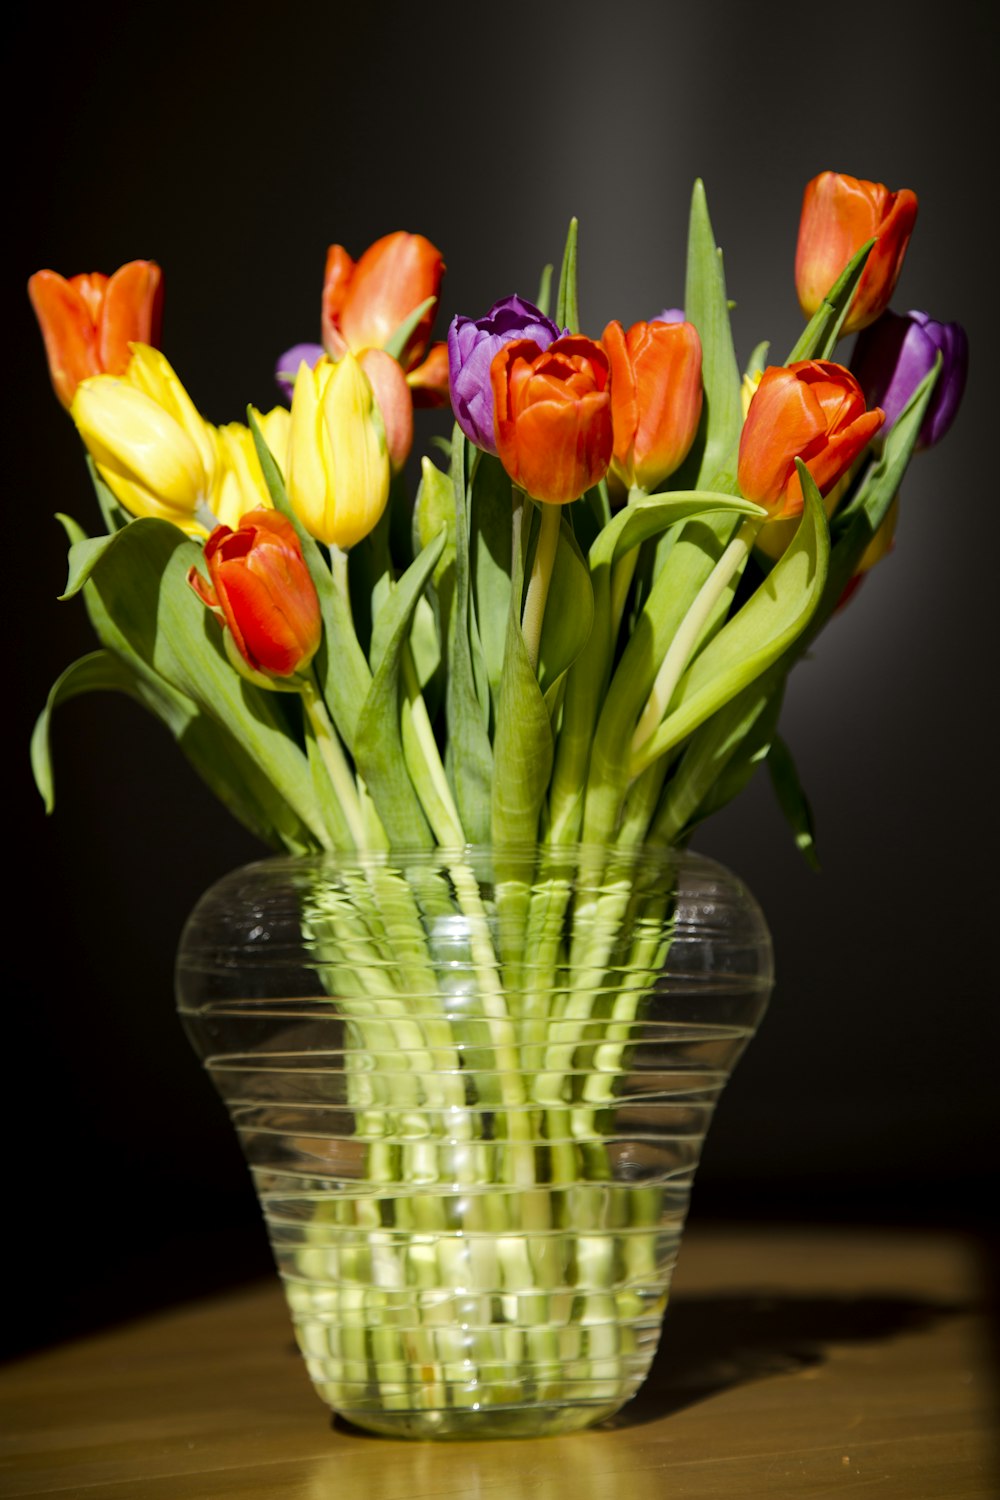 red and yellow tulips in clear glass vase